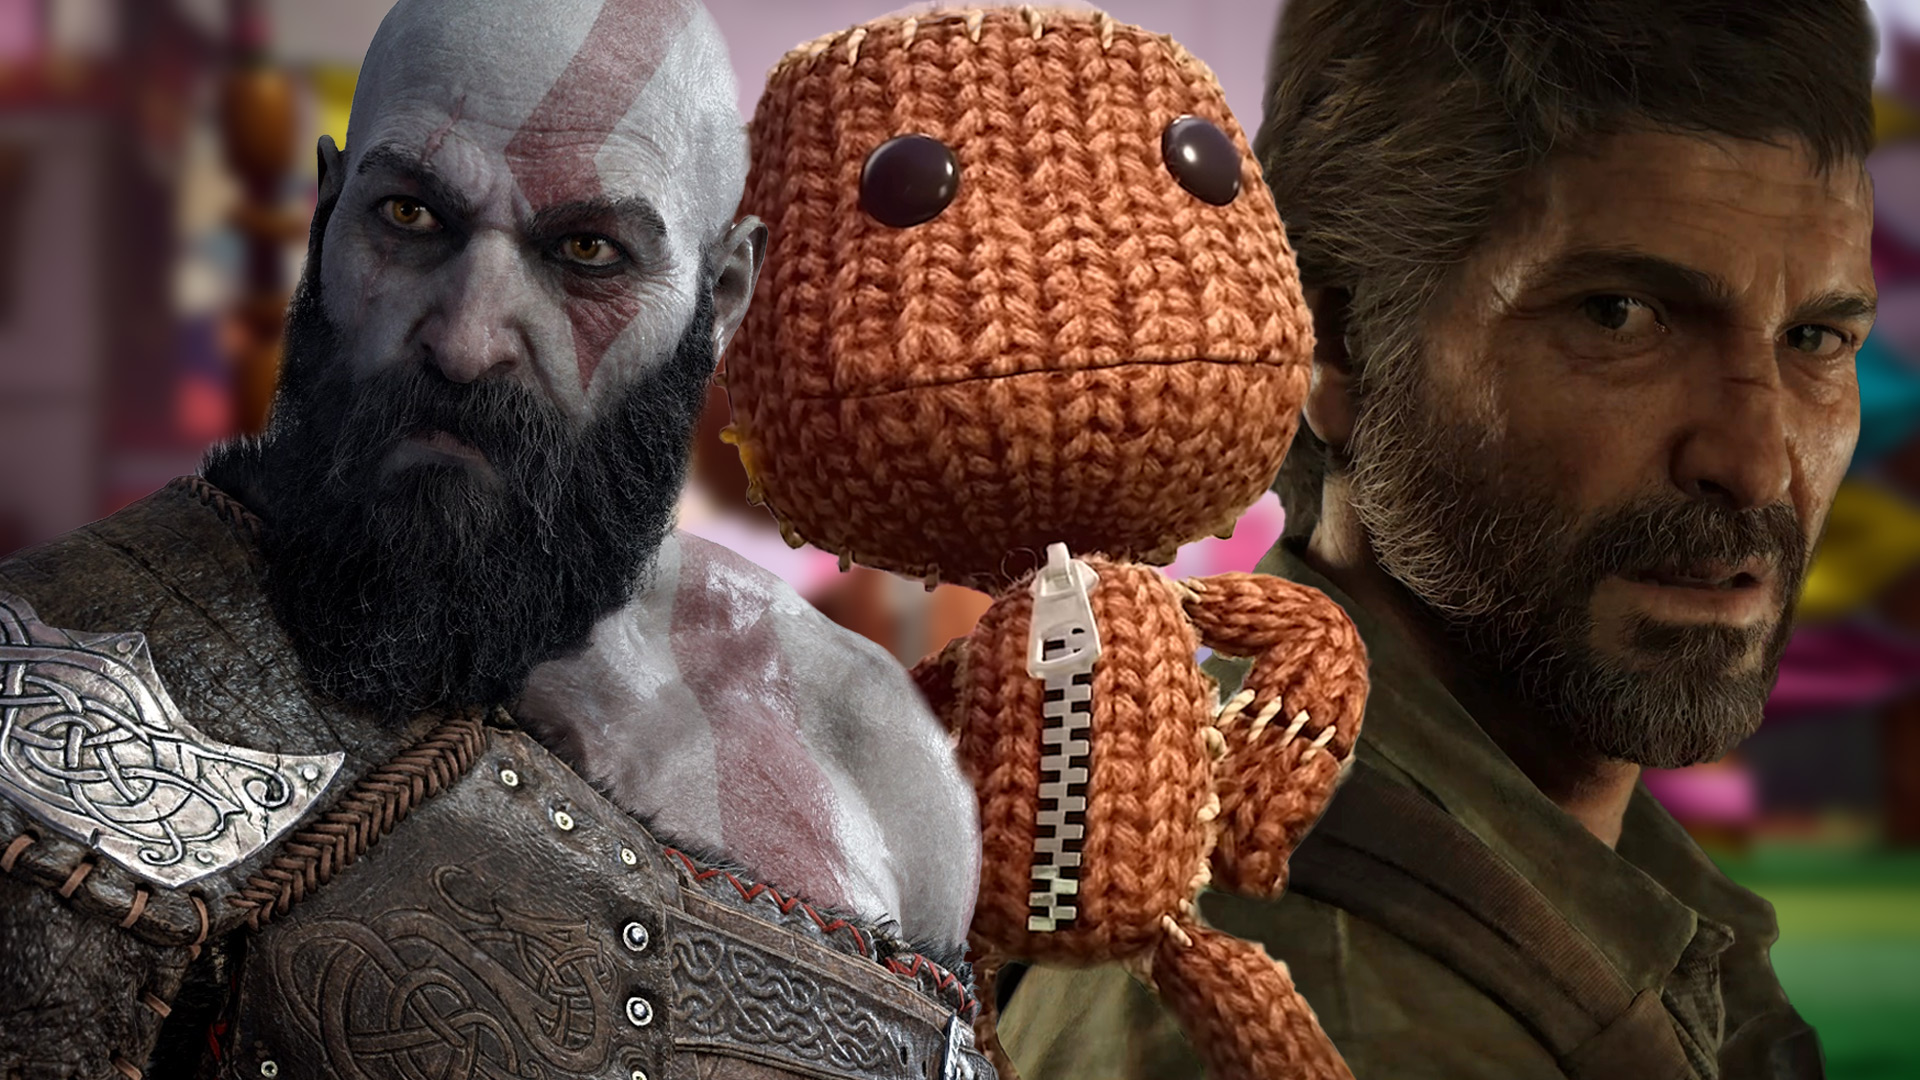 PlayStation Exclusives Such as God of War and Returnal Could be